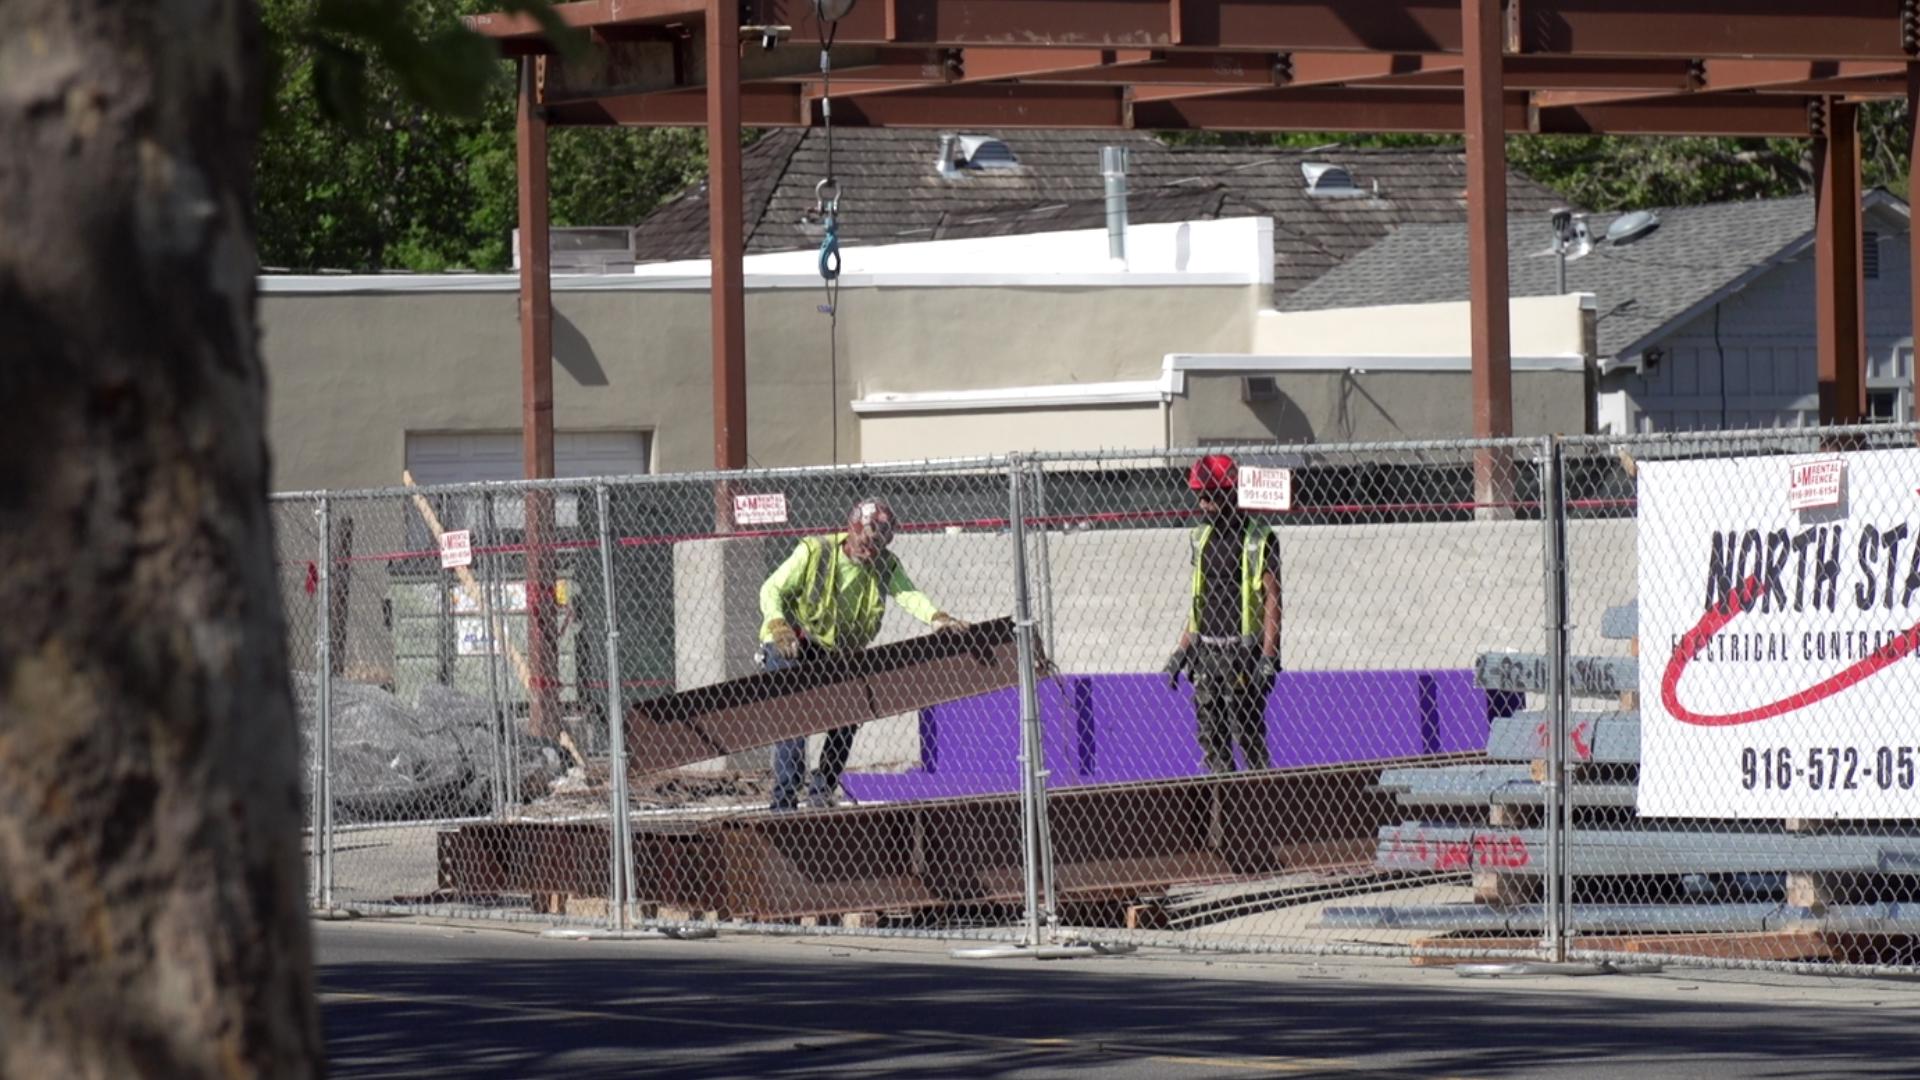 A structural beam, reminiscent of the Sacramento Kings’ victory beacon, will be installed at the “Channel 24” building under construction at 24th and R streets.